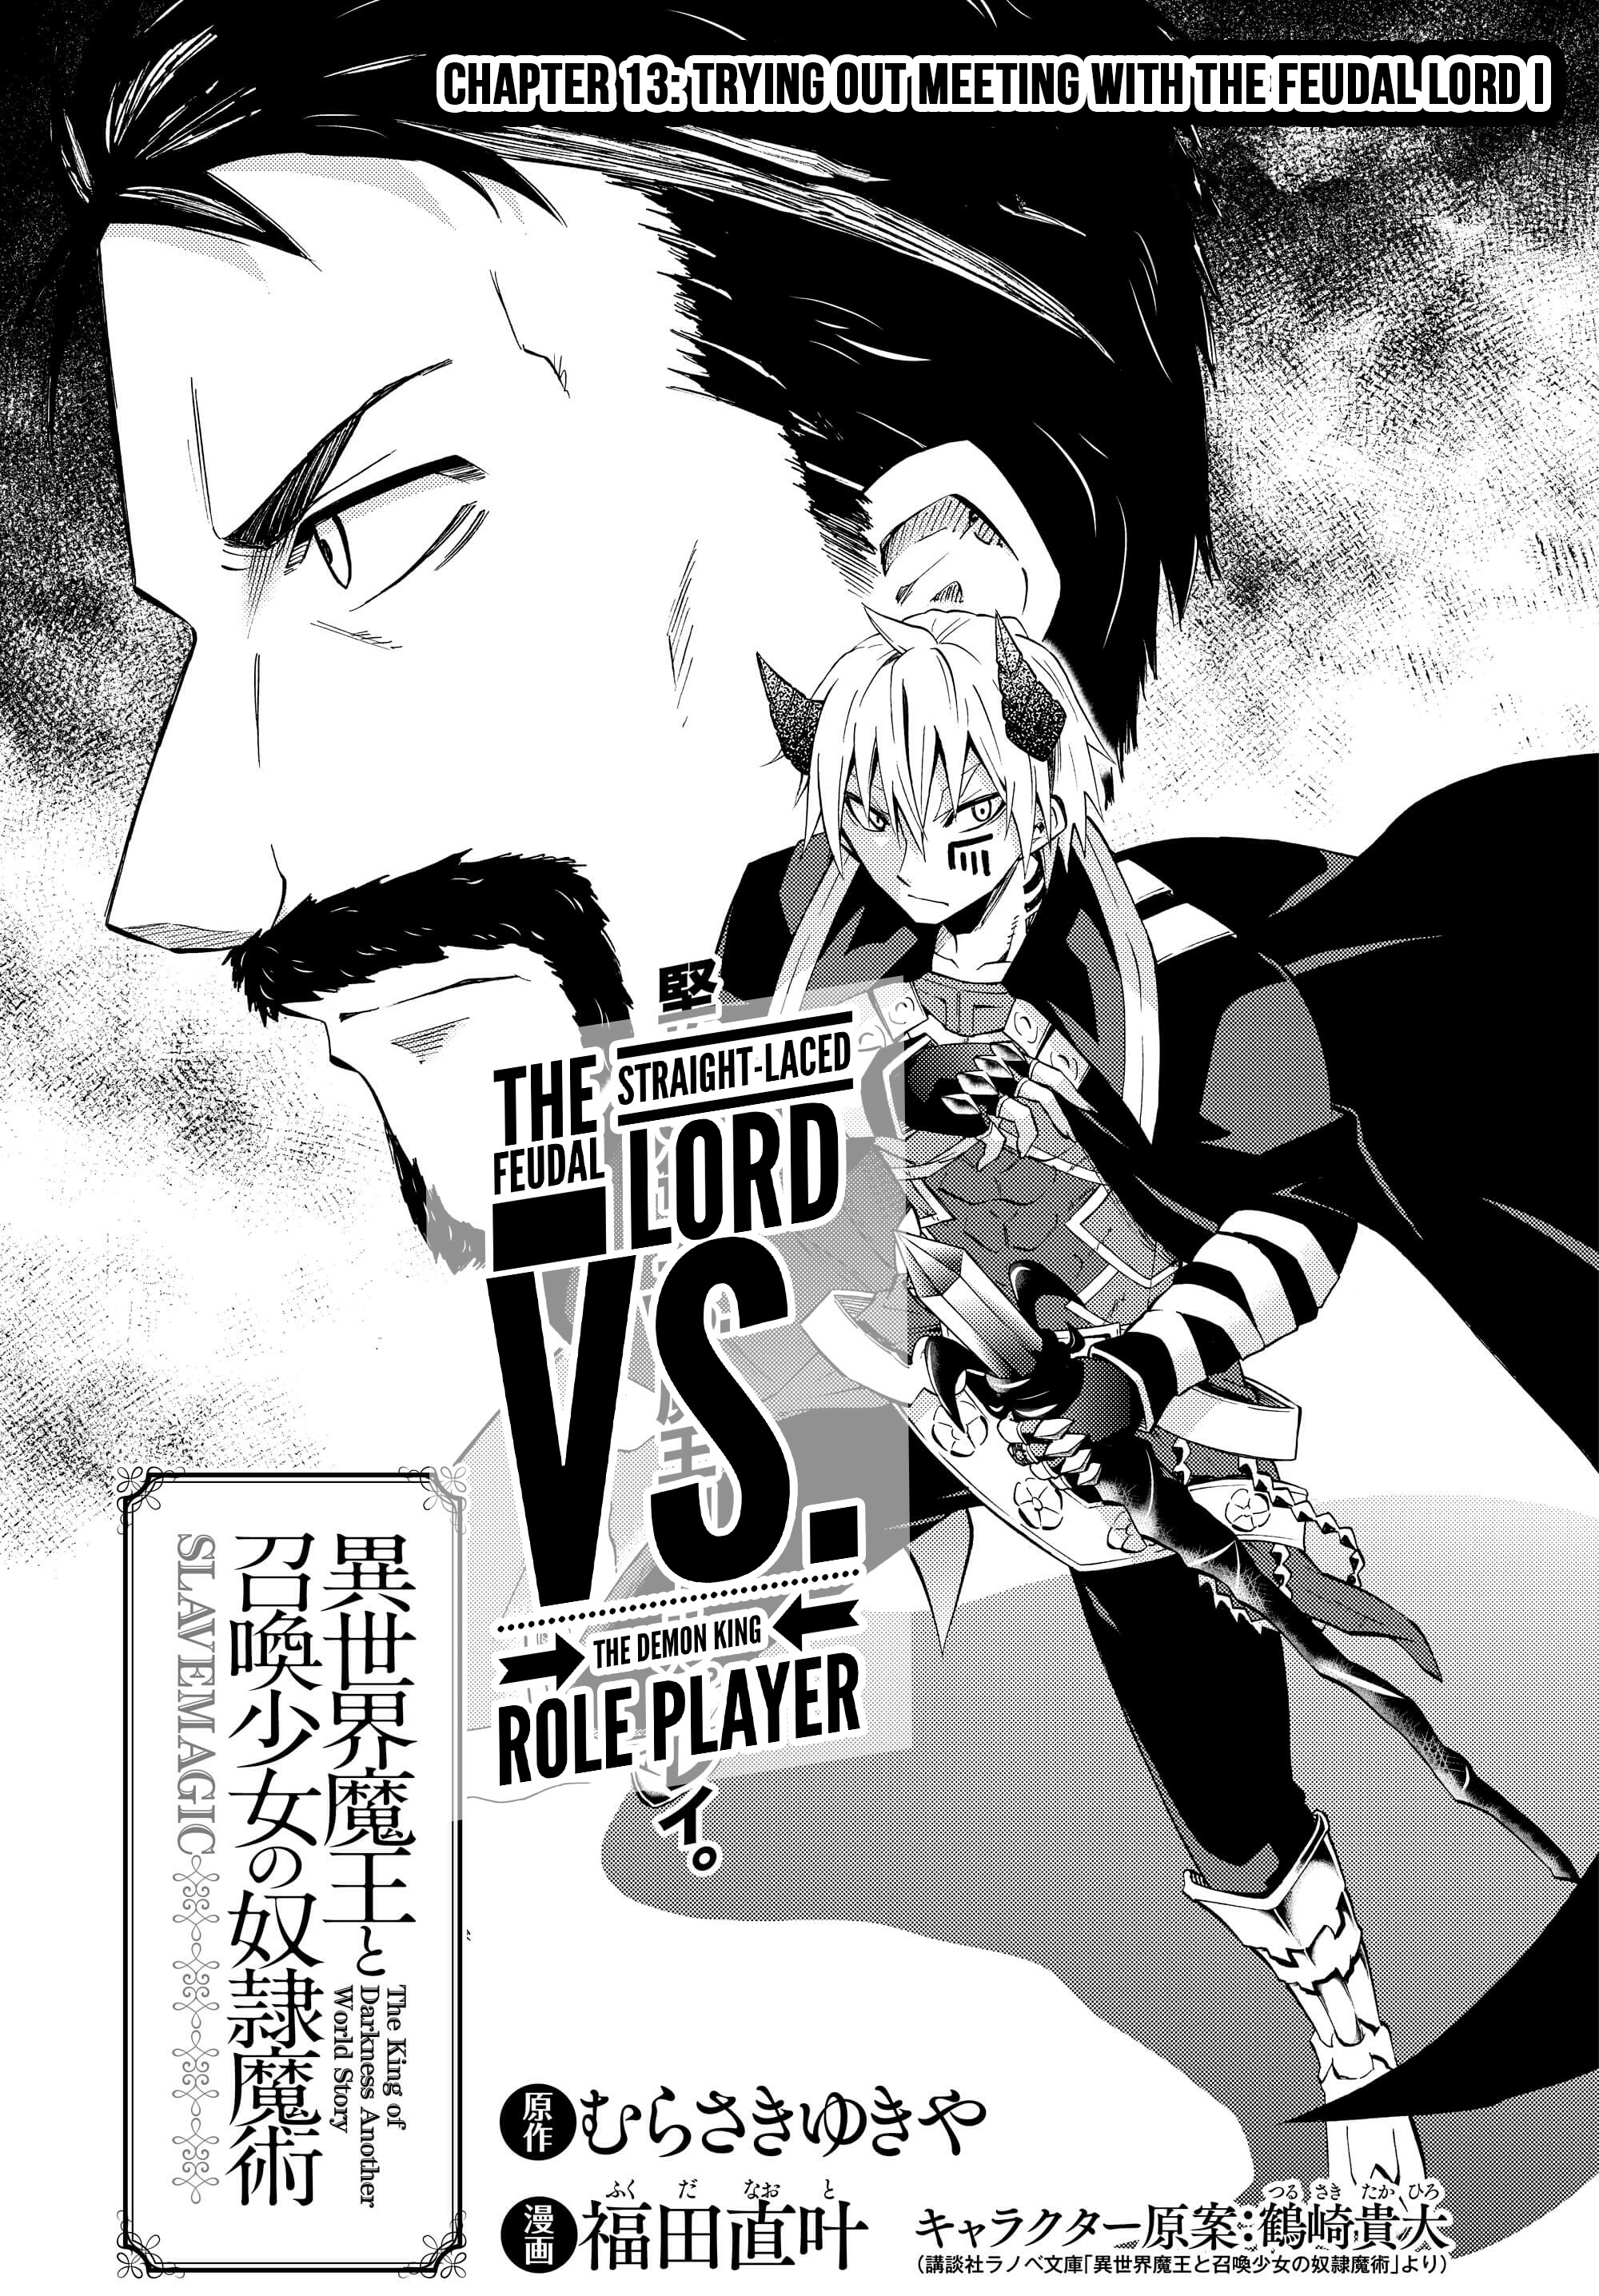 Isekai Maou To Shoukan Shoujo No Dorei Majutsu Vol.3 Chapter 13.1: Trying Out Meeting With The Feudal Lord I - Picture 3